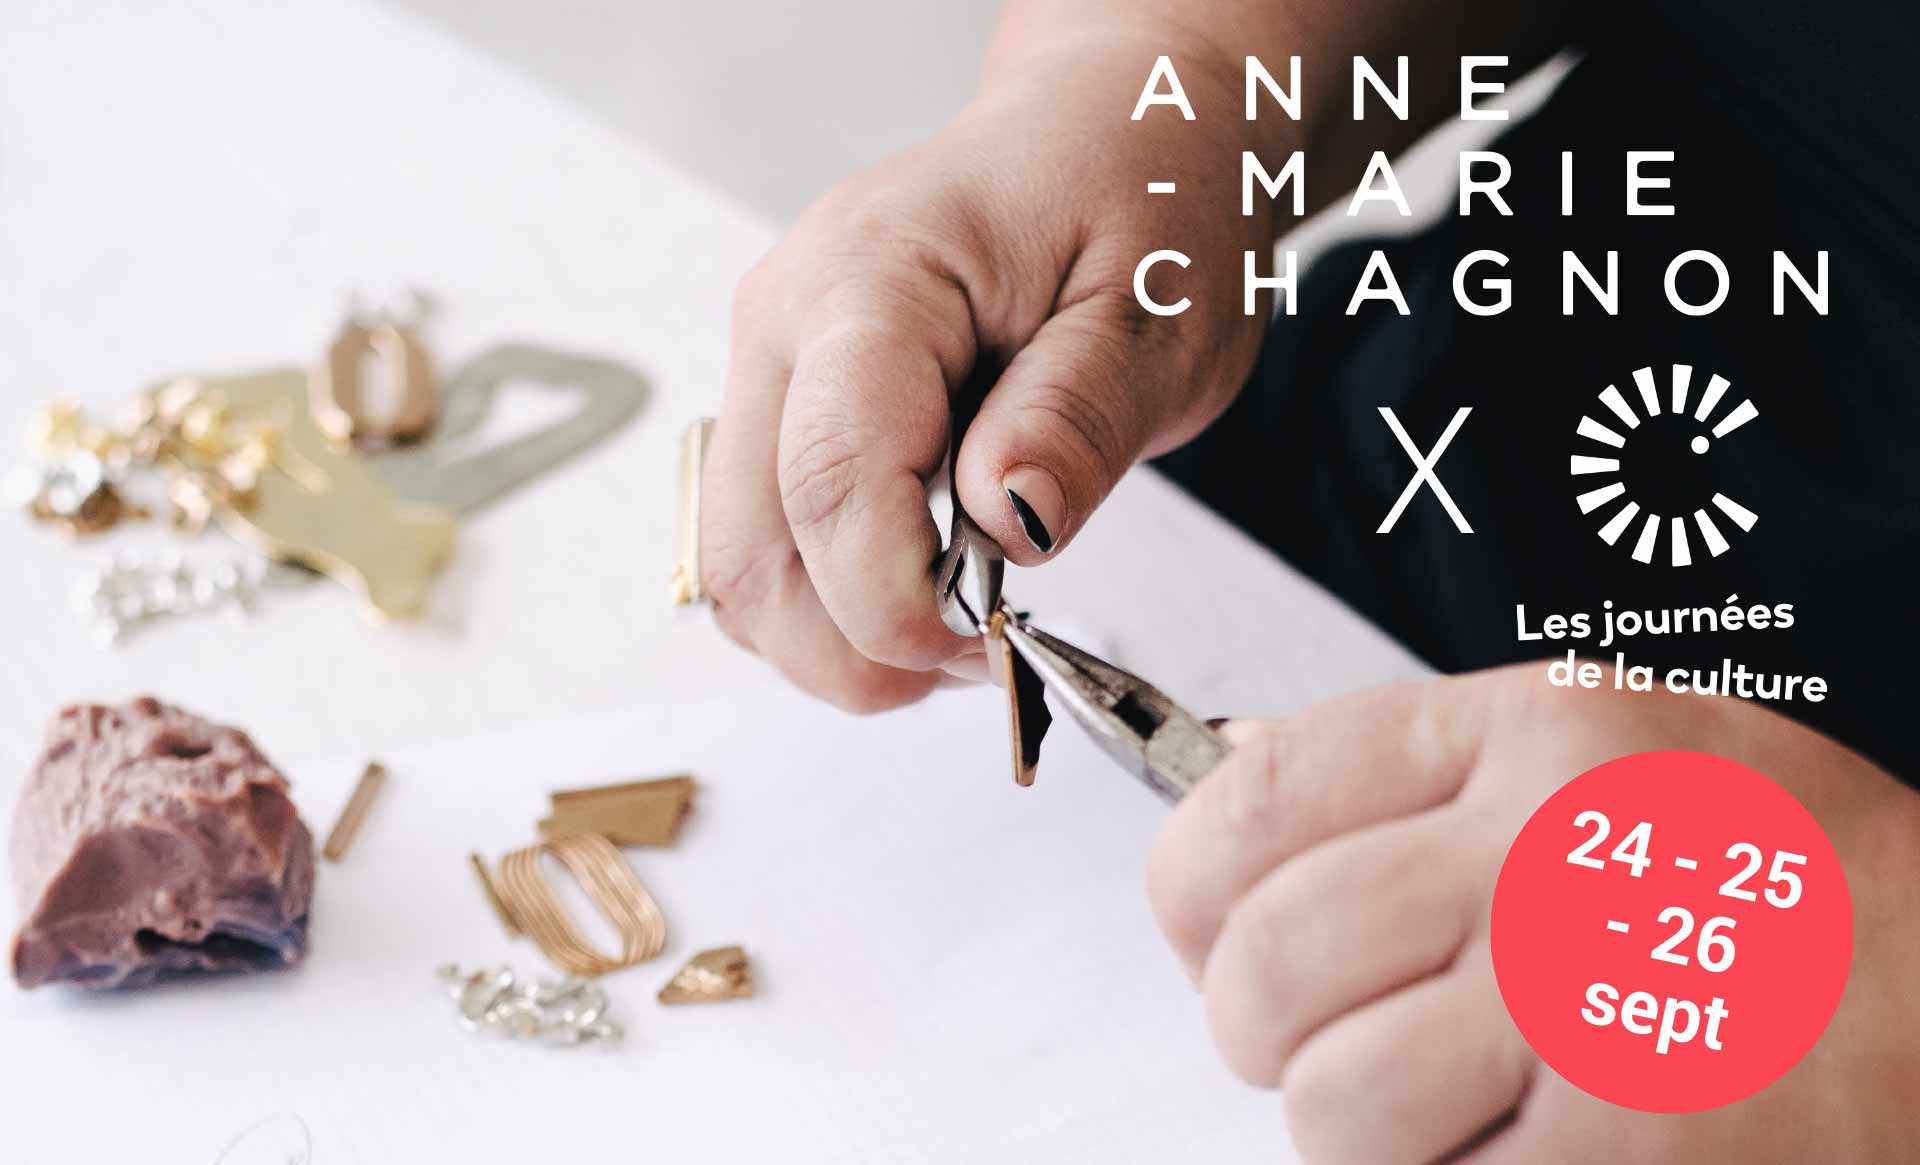 Take our tour and visit Anne-Marie Chagnon’s workshop. Come and discover this multidisciplinary artist’s creative universe.